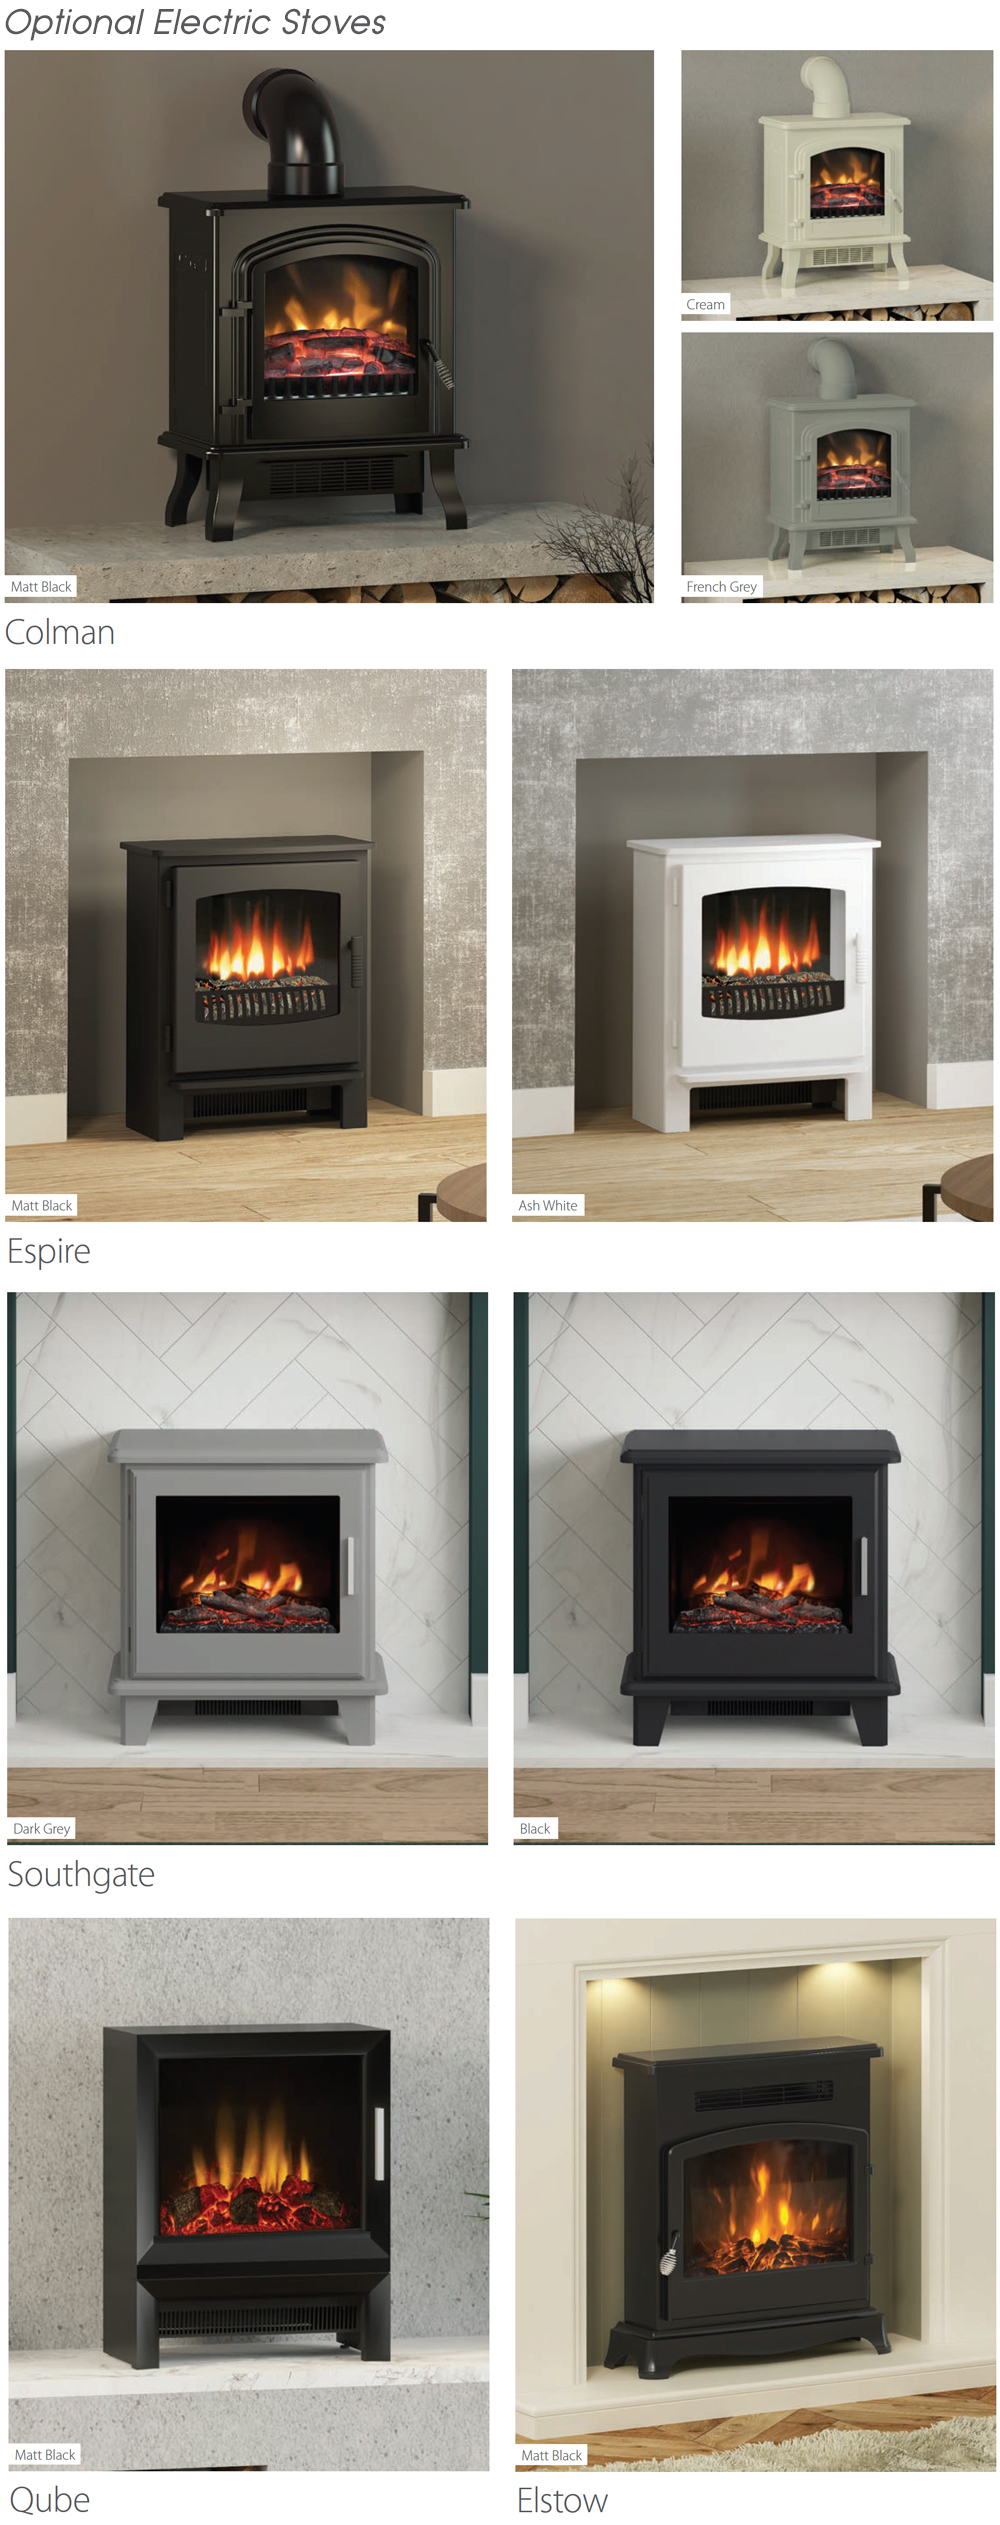 Optional Electric Stoves